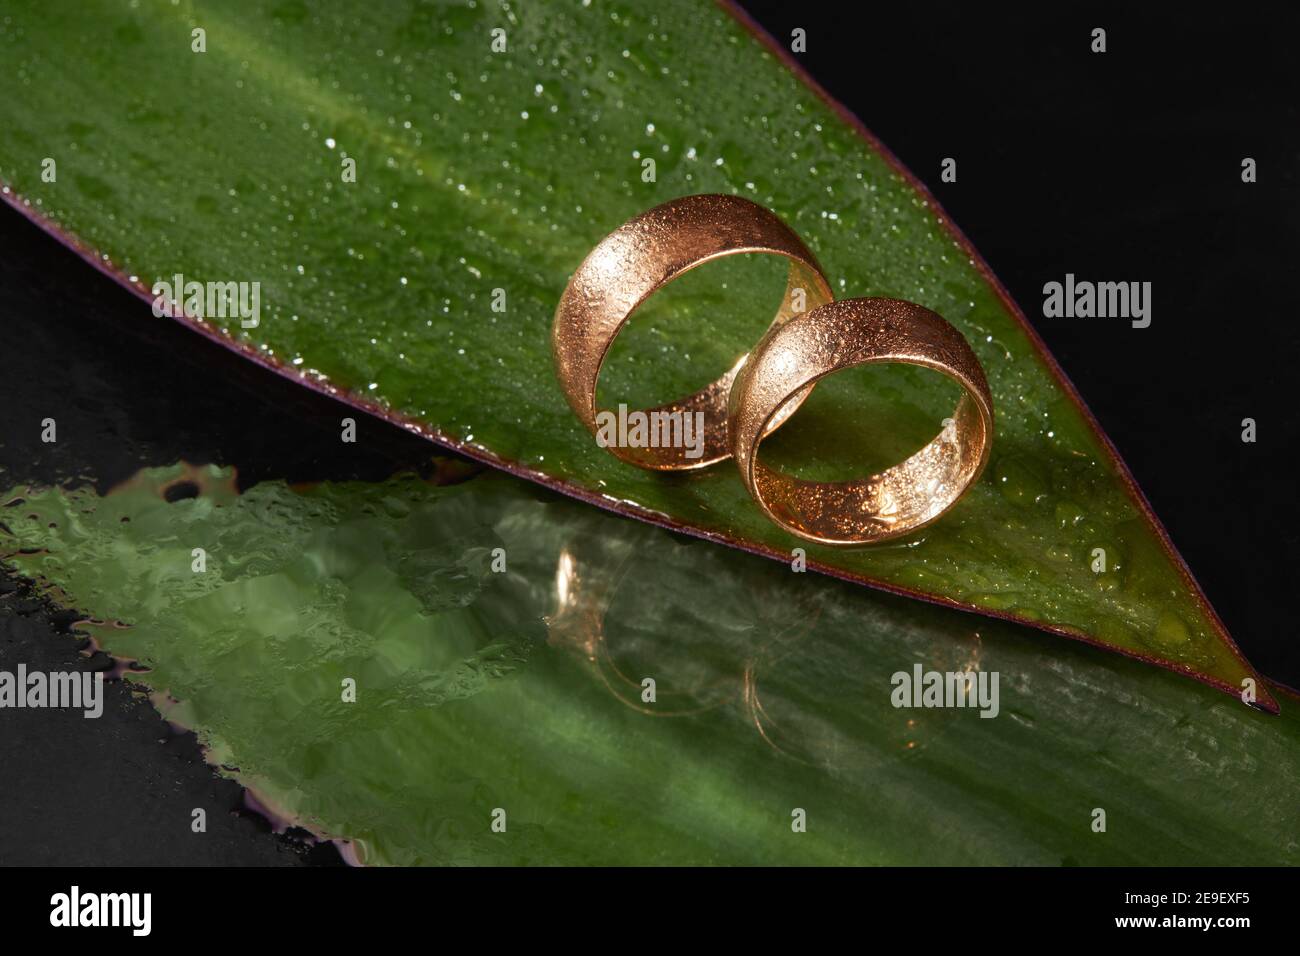 Wedding rings on a beautiful wet leaf background. Wedding concept Stock Photo